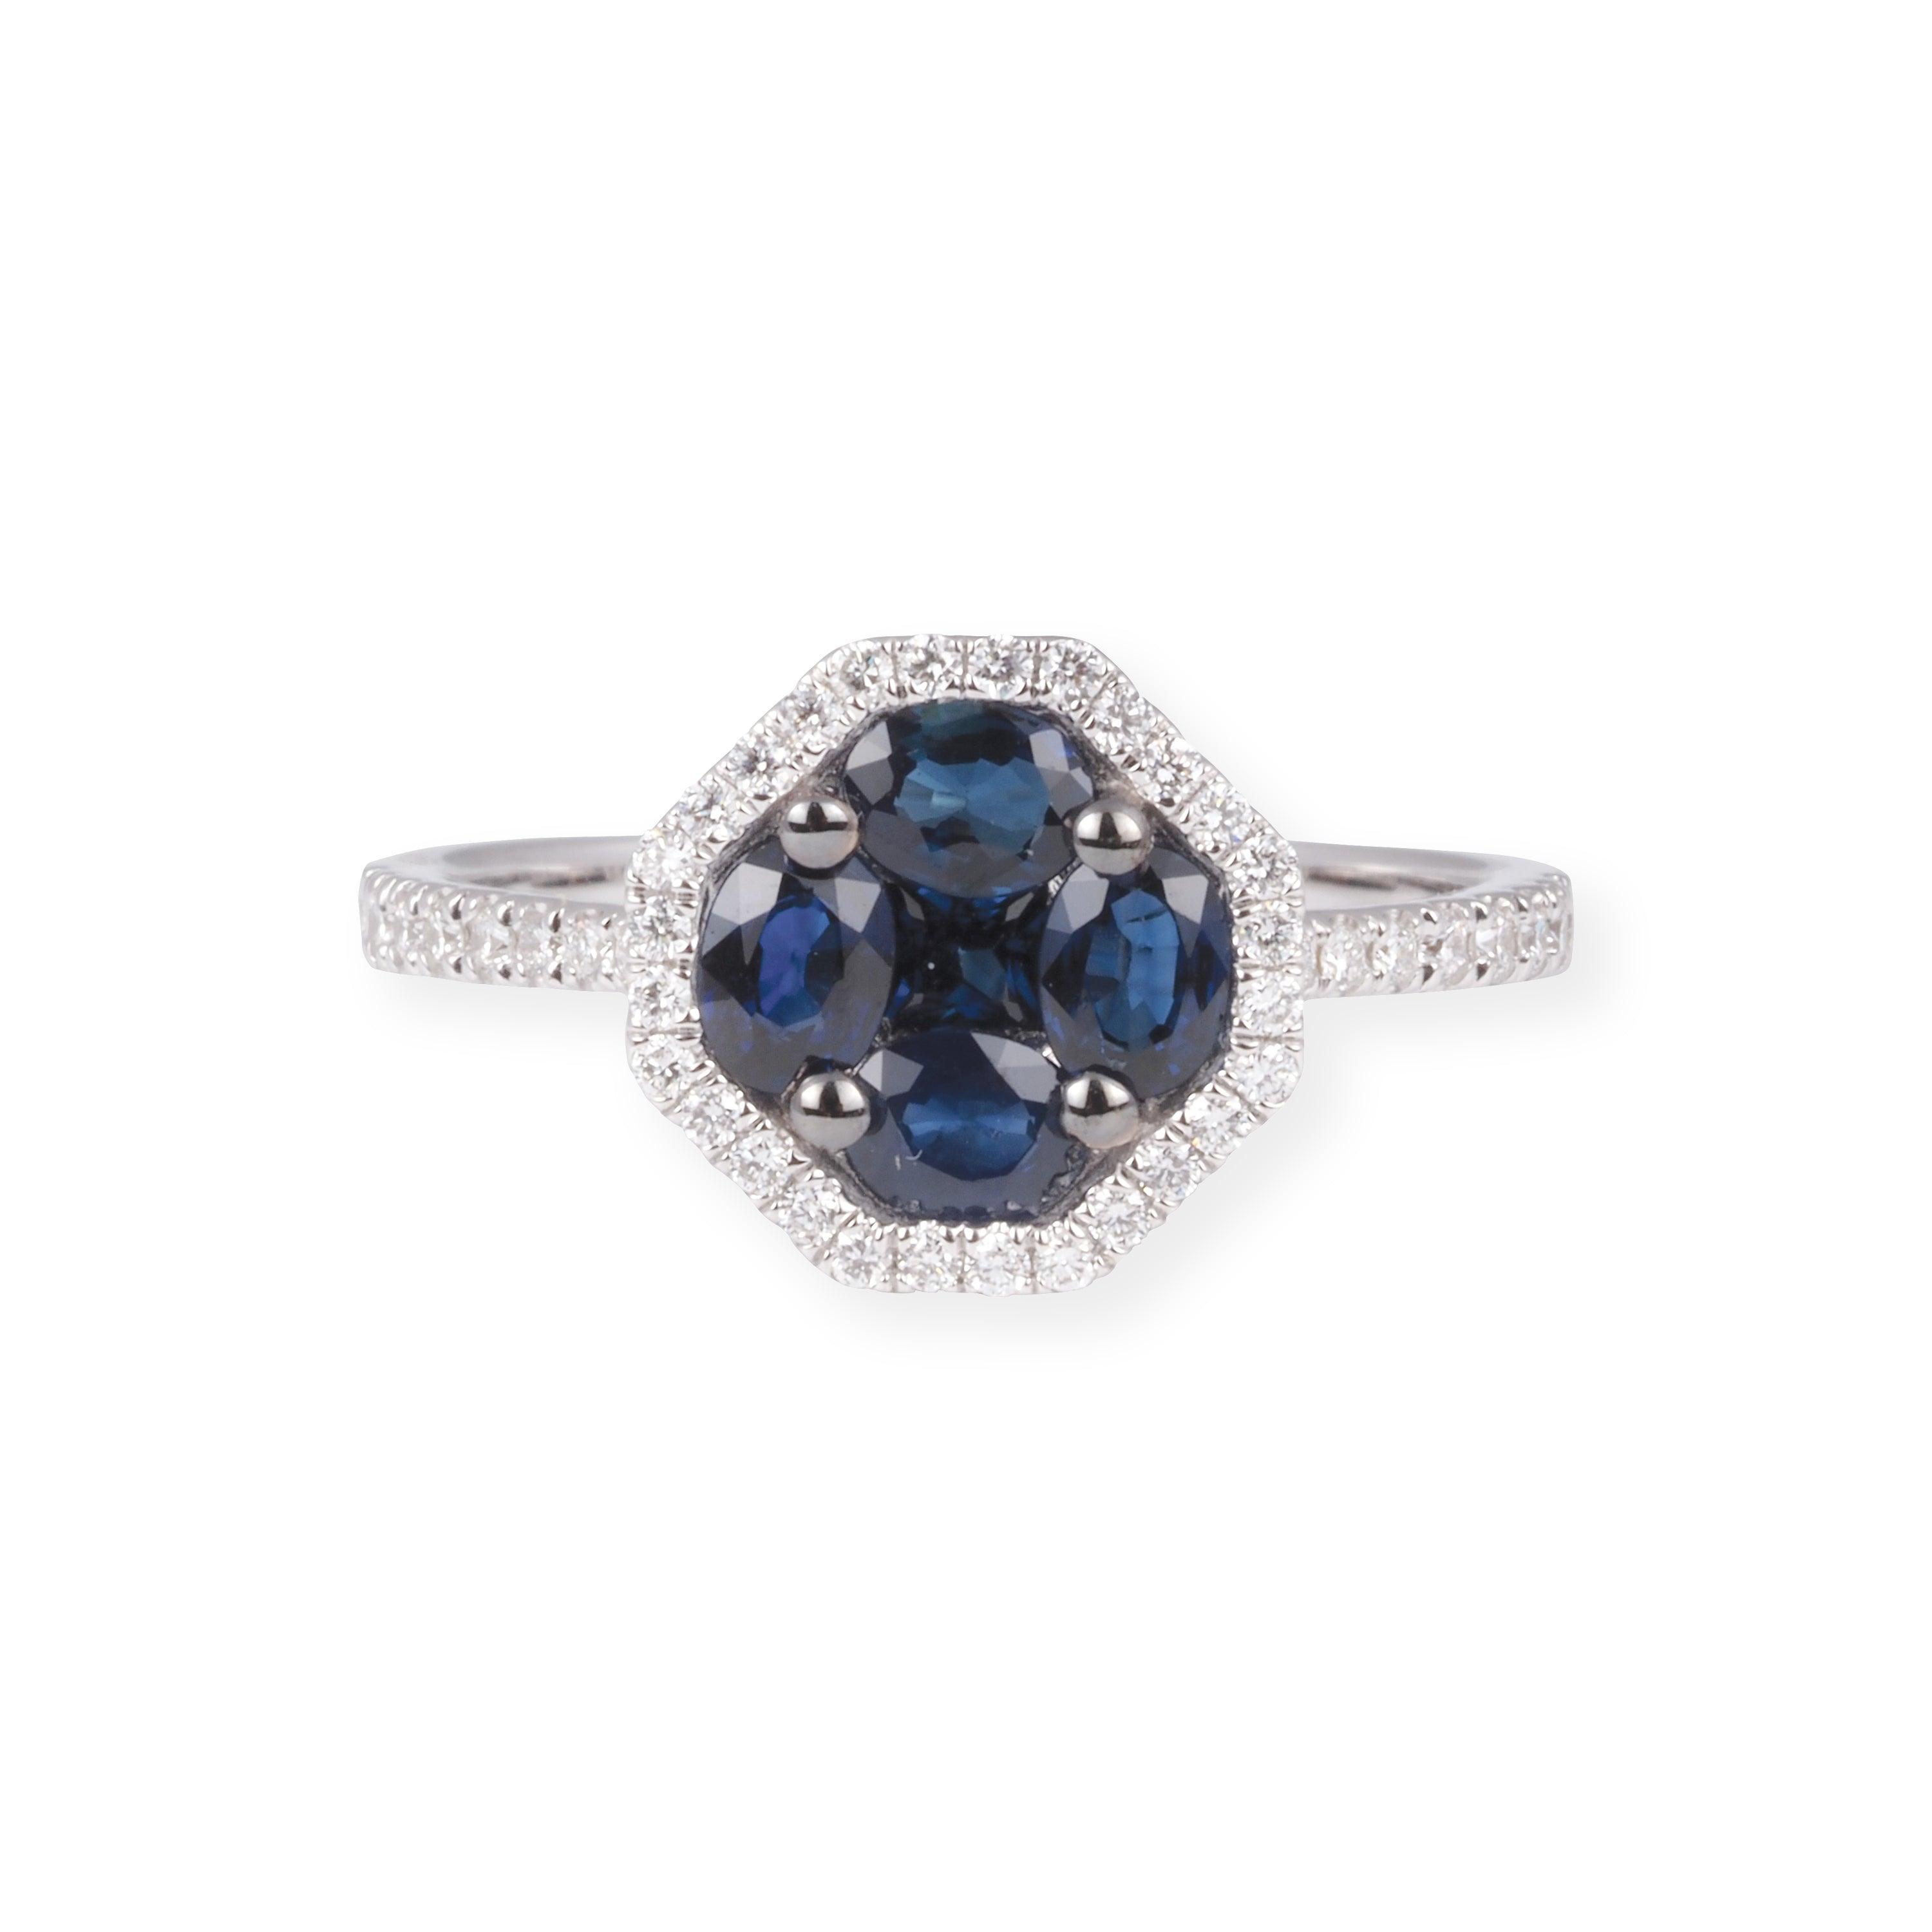 18ct White Gold Diamond and Blue Sapphire Cluster Ring LR-7030 - Minar Jewellers